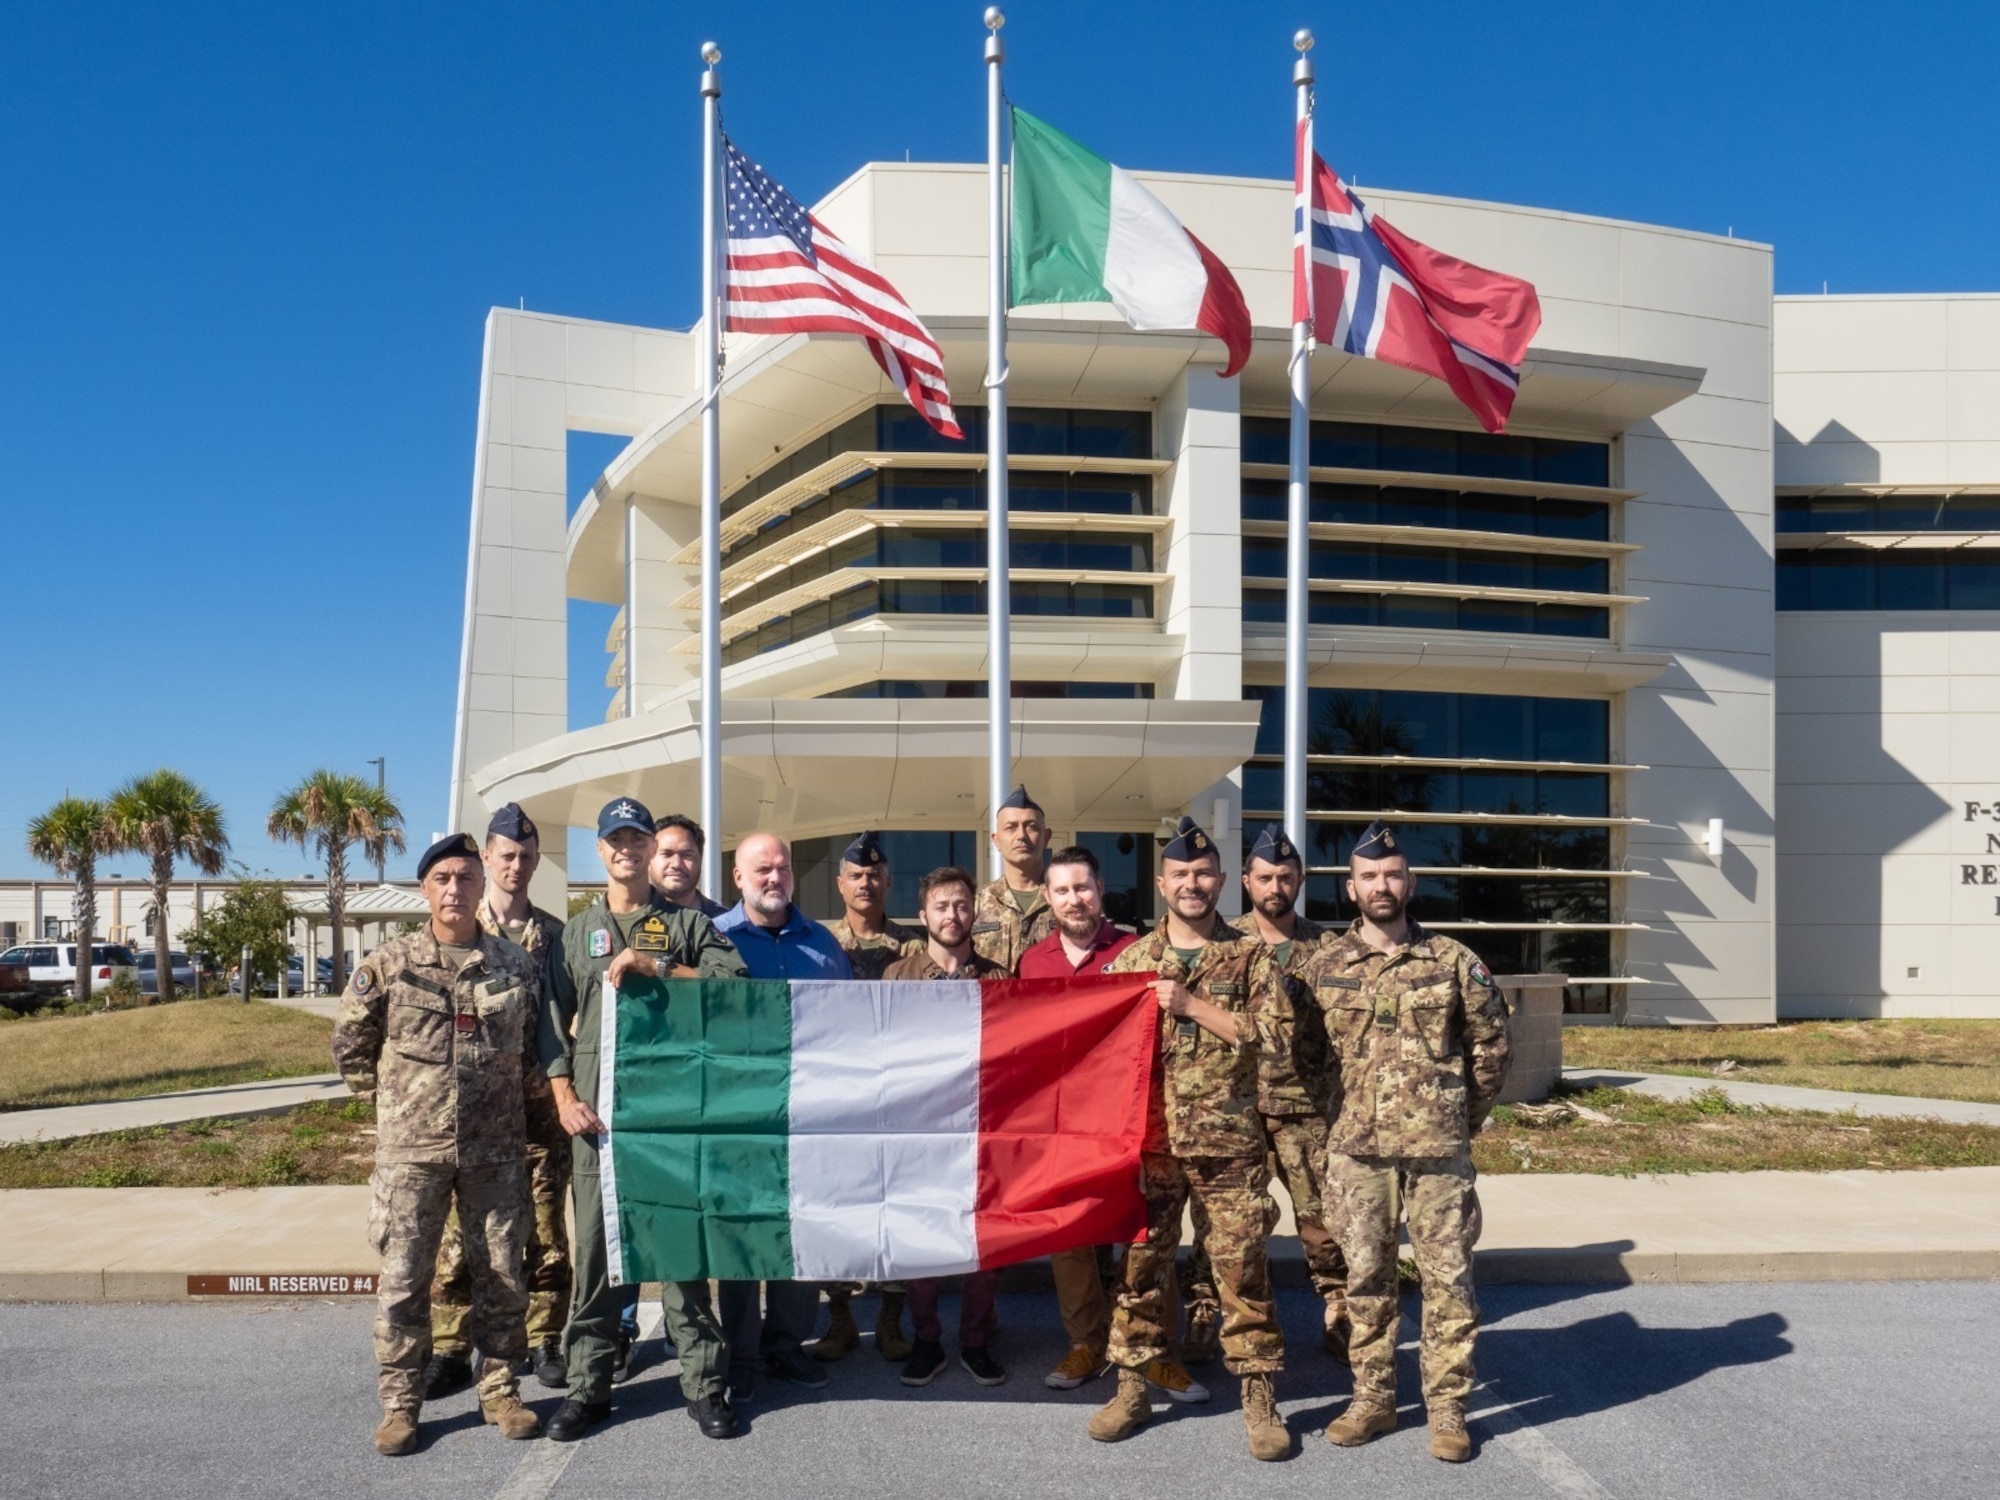 Members of the Italian military pose for a photo outside the F-35 Norway / Italy Reprogramming Facility at Eglin Air Force Base, Fla., Oct. 28, 2022. The Italian military team completed its first Mission Data File for the F-35 as part of the F-35 Partner Support Complex. (Courtesy Photo)